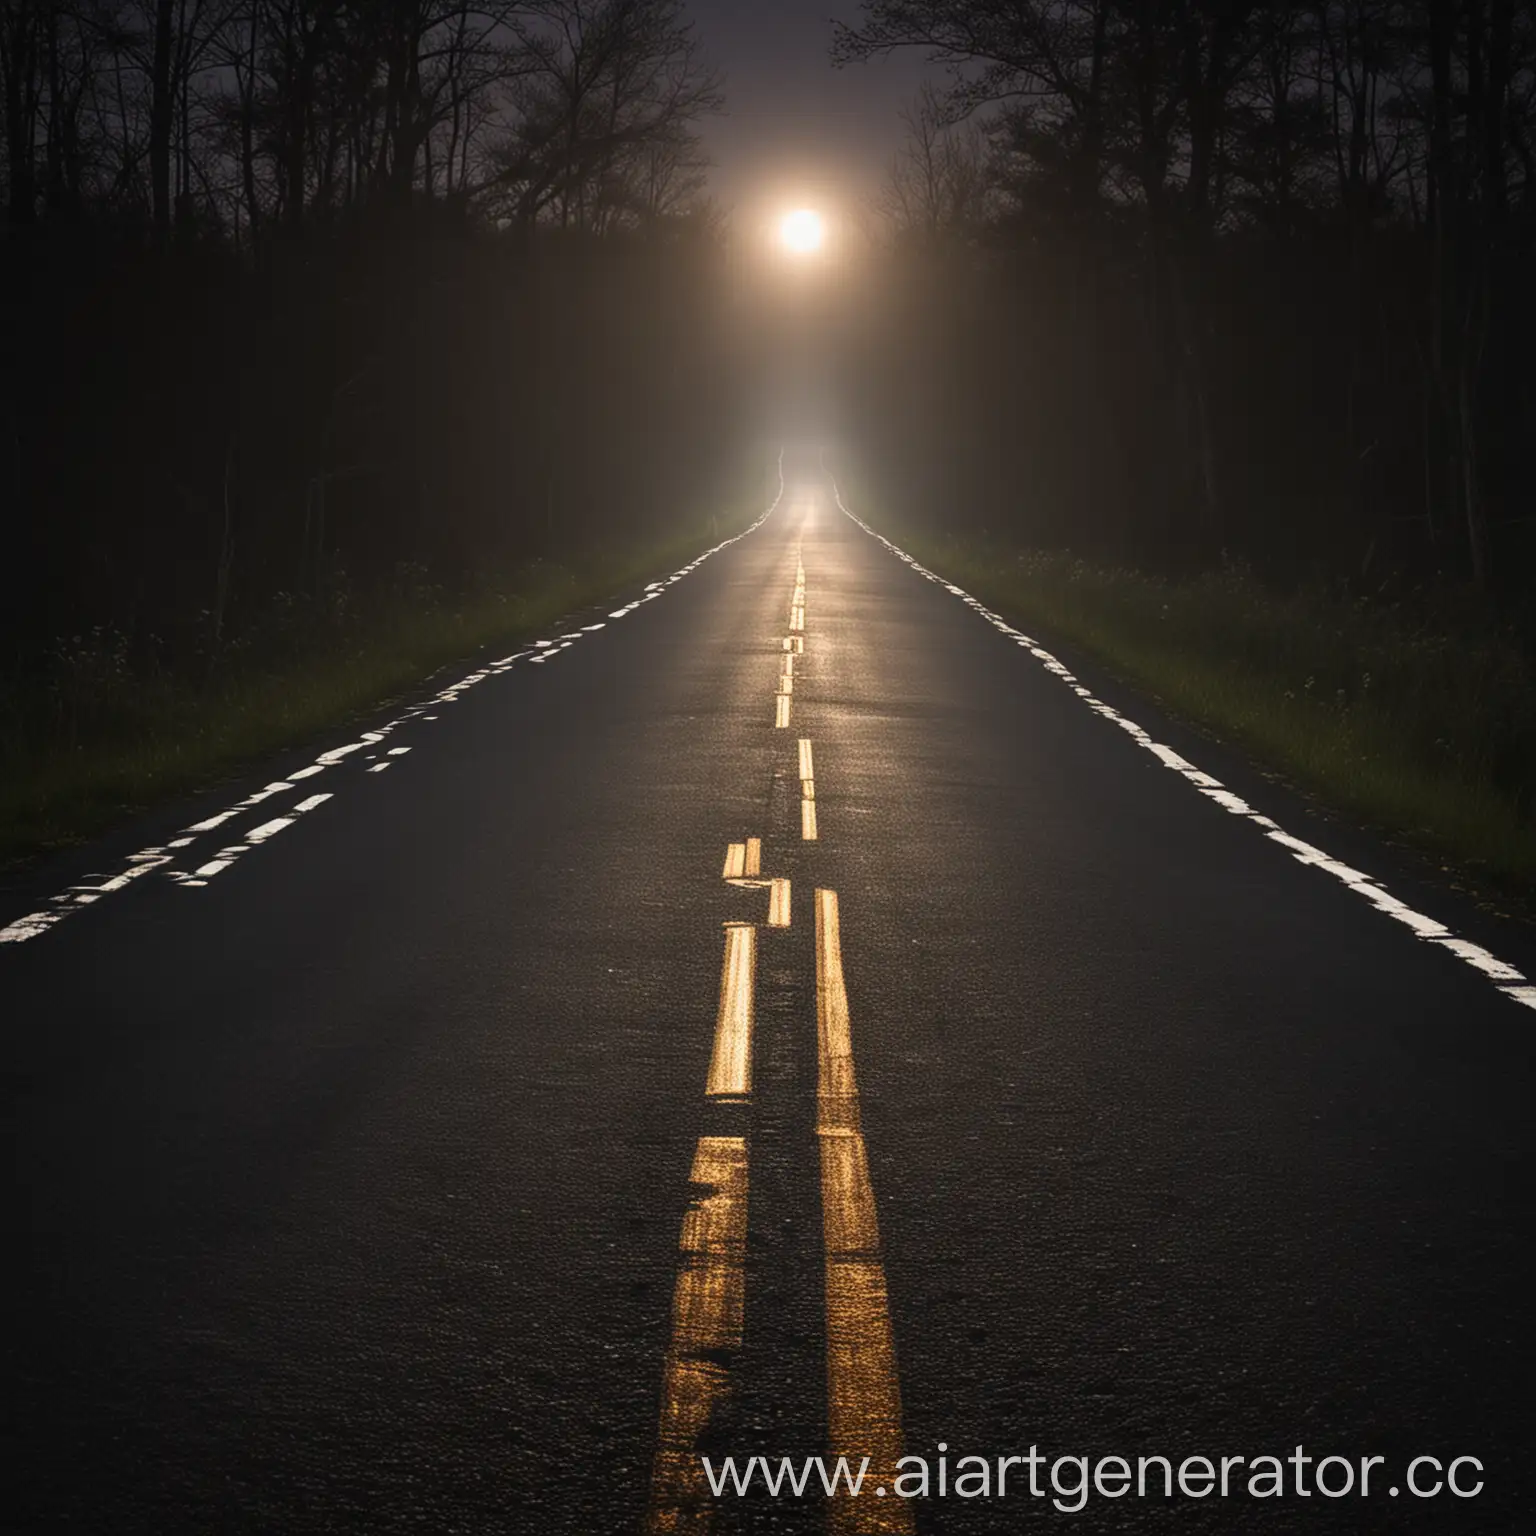 Illuminated-Path-Glowing-Road-Leading-from-Darkness-to-Light